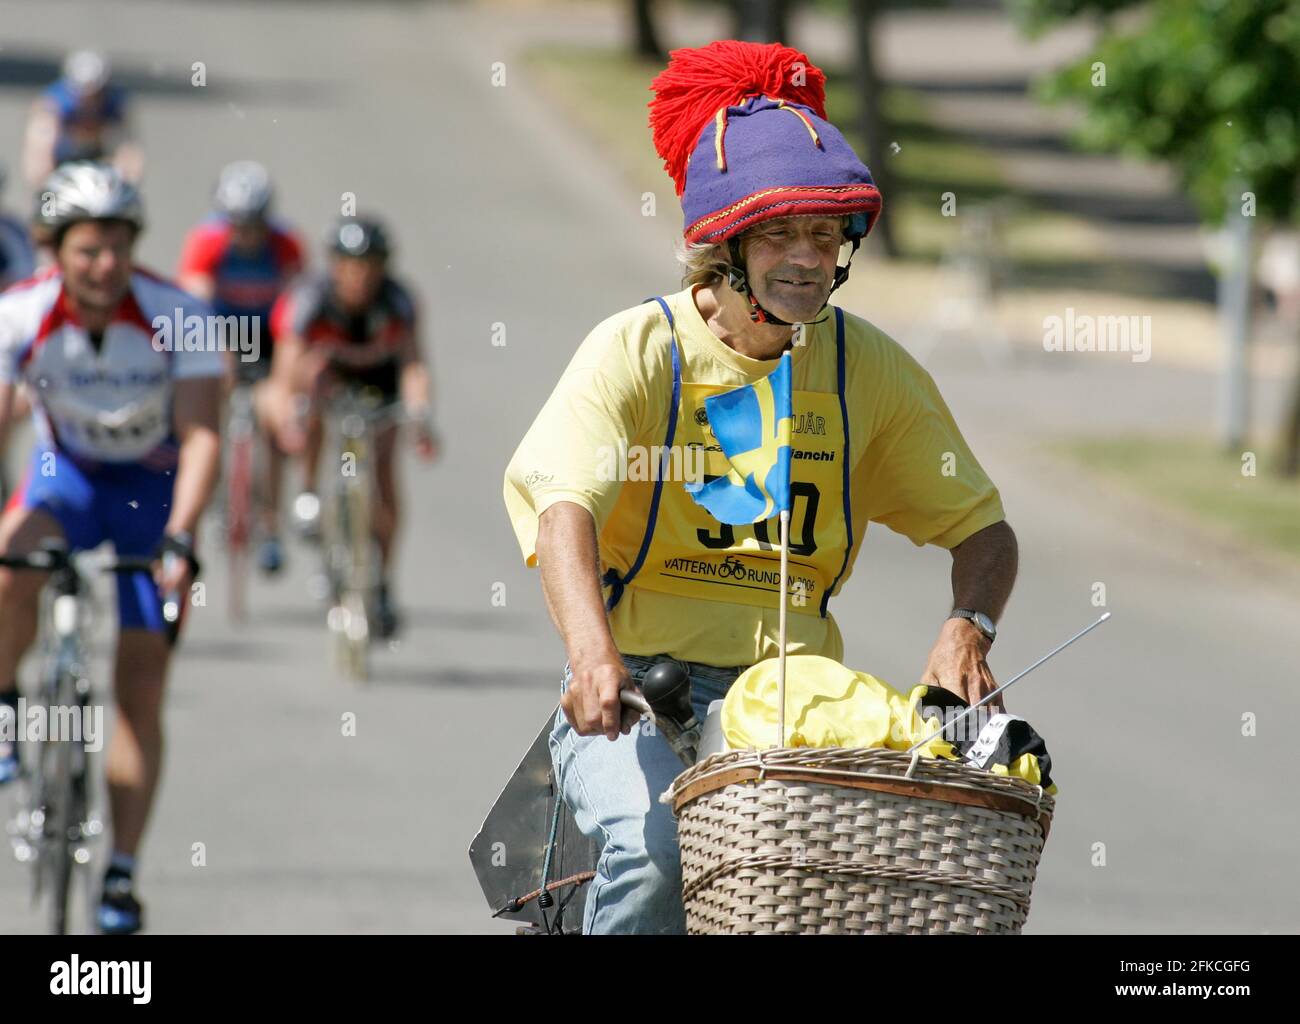 Stig Lappen Johansson, one of the round's audience favorites, on his way to  the finish, during the cycling exercise race Vätternrundan, in the city of  Motala, Sweden Stock Photo - Alamy